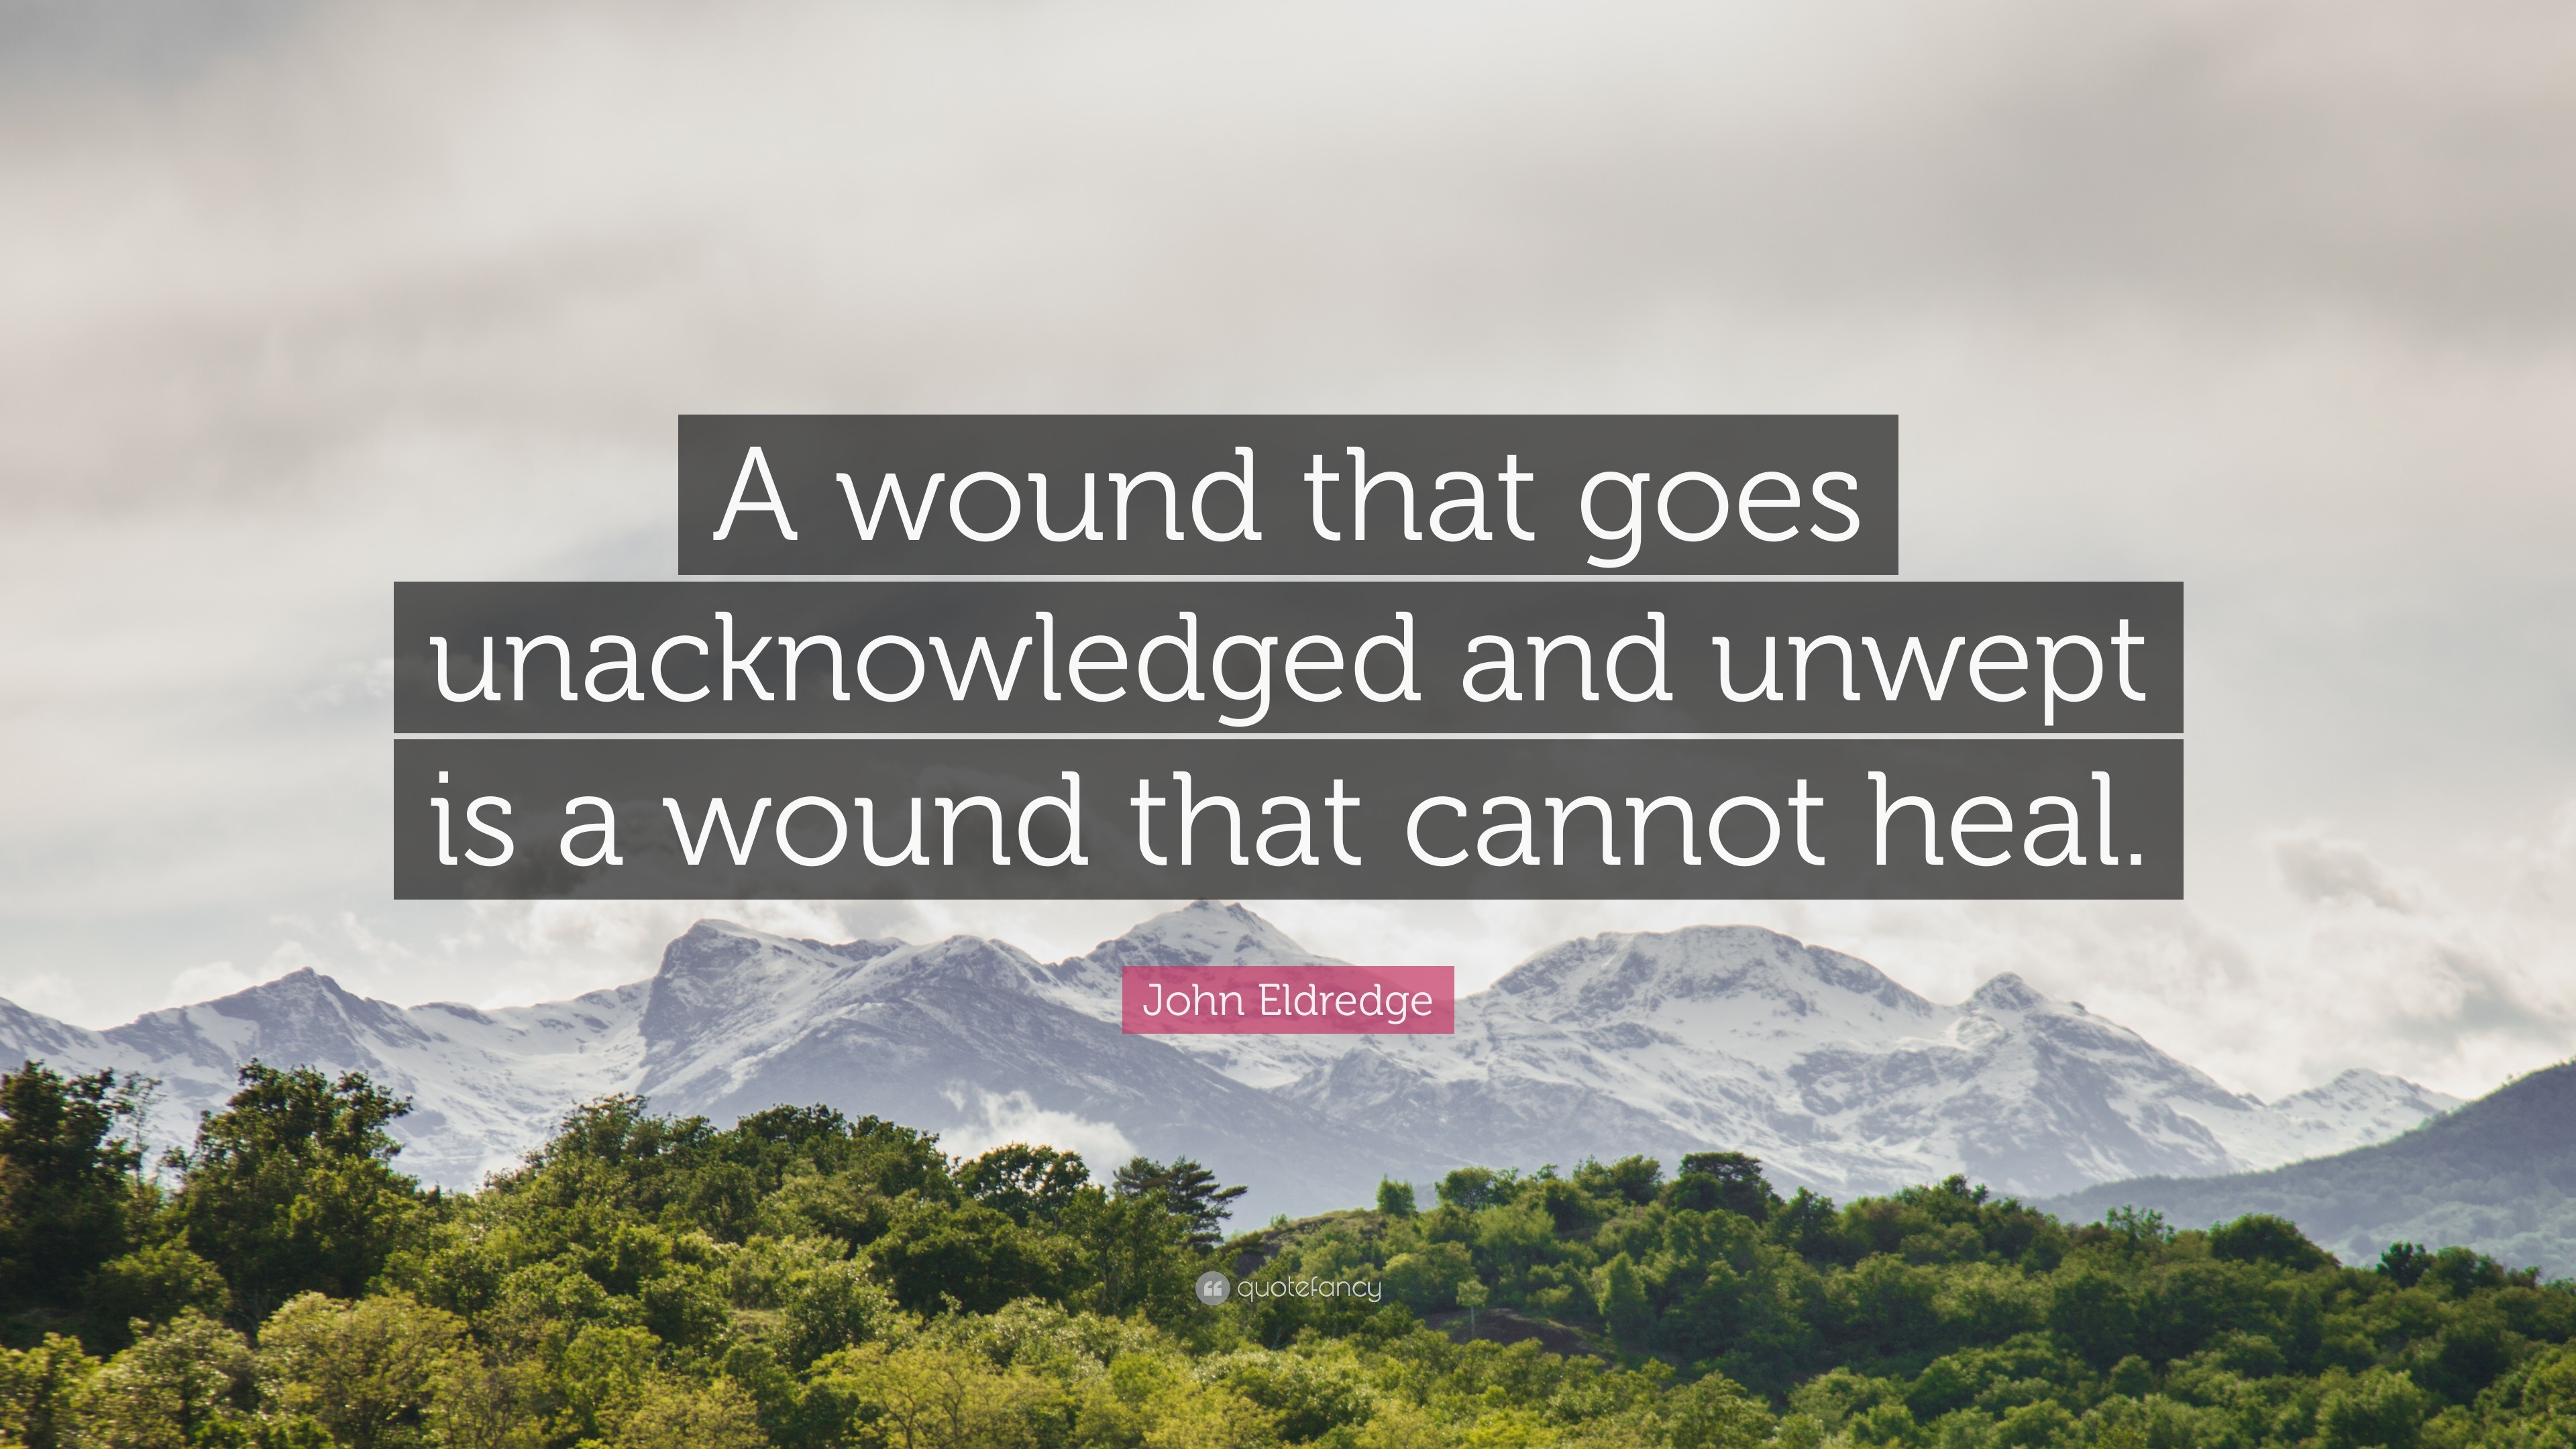 John Eldredge Quote: "A wound that goes unacknowledged and ...